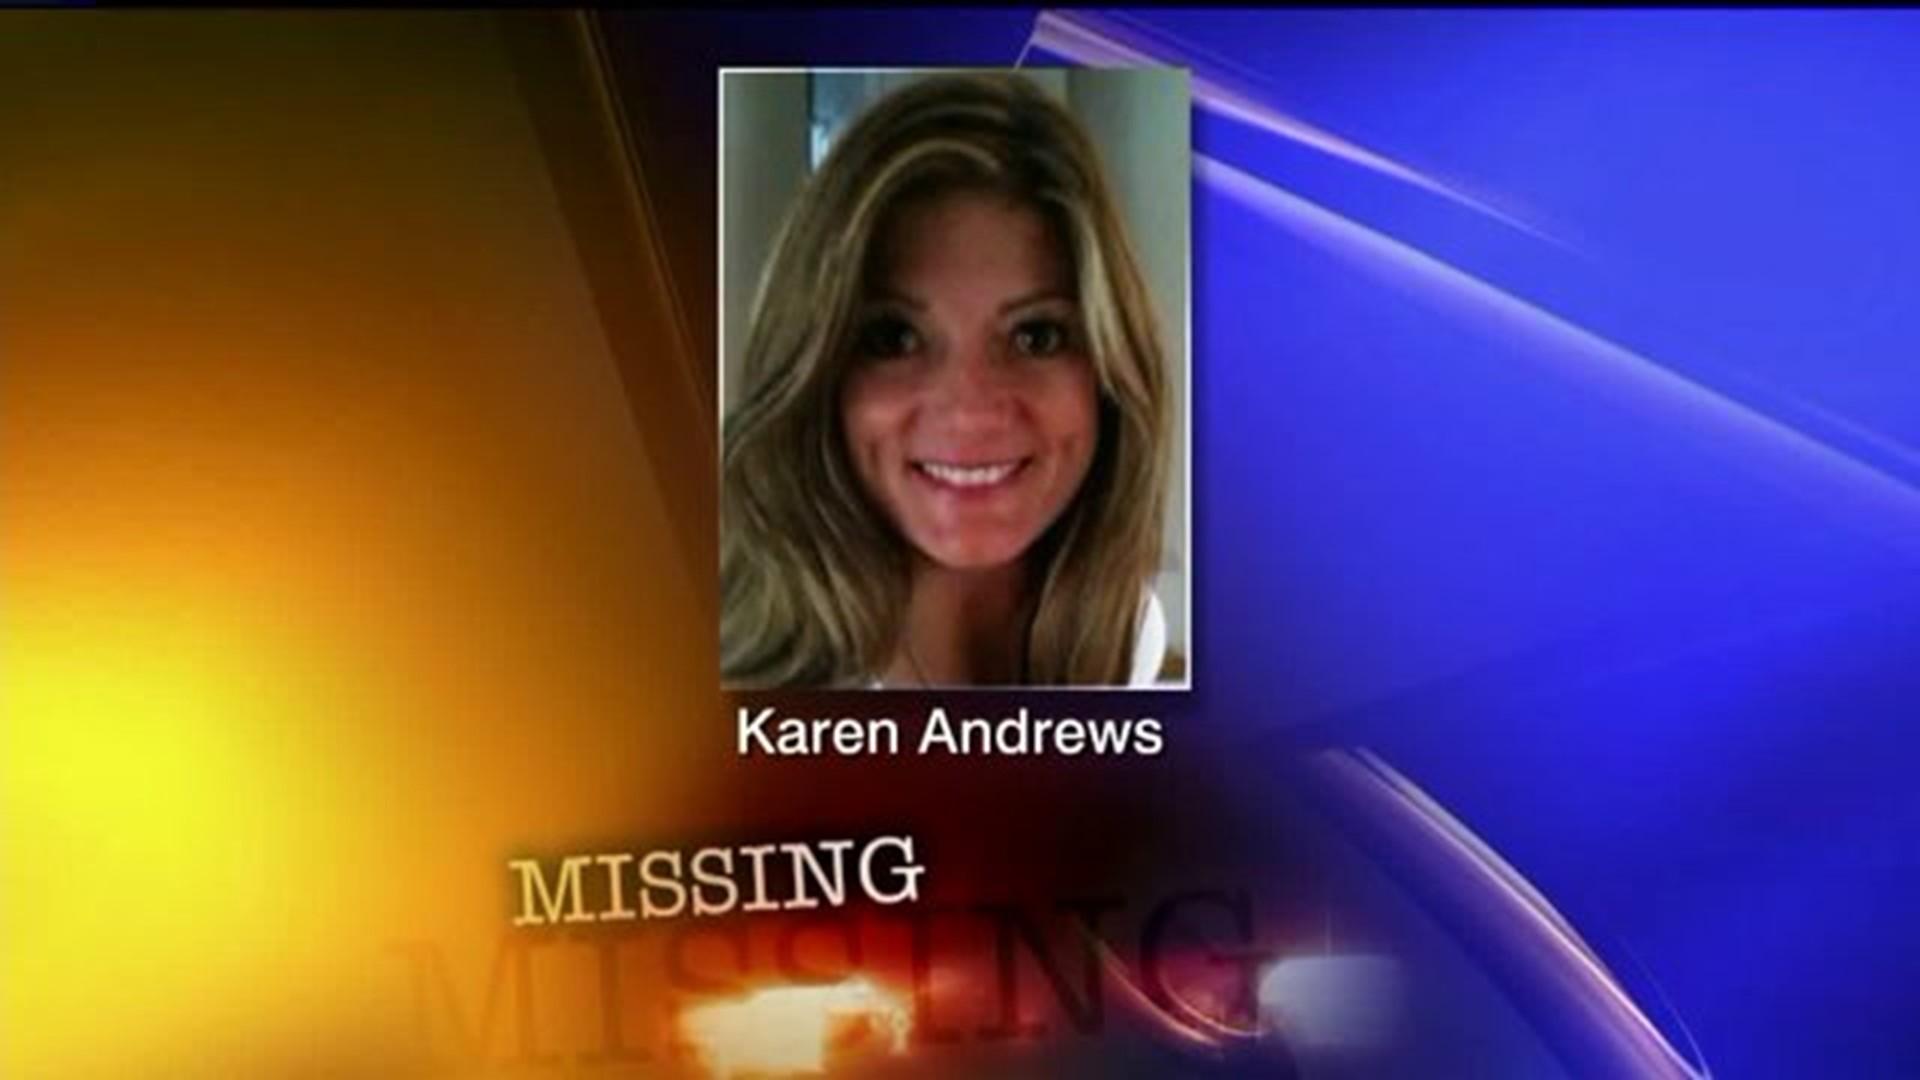 Search for Missing Woman Near White Haven